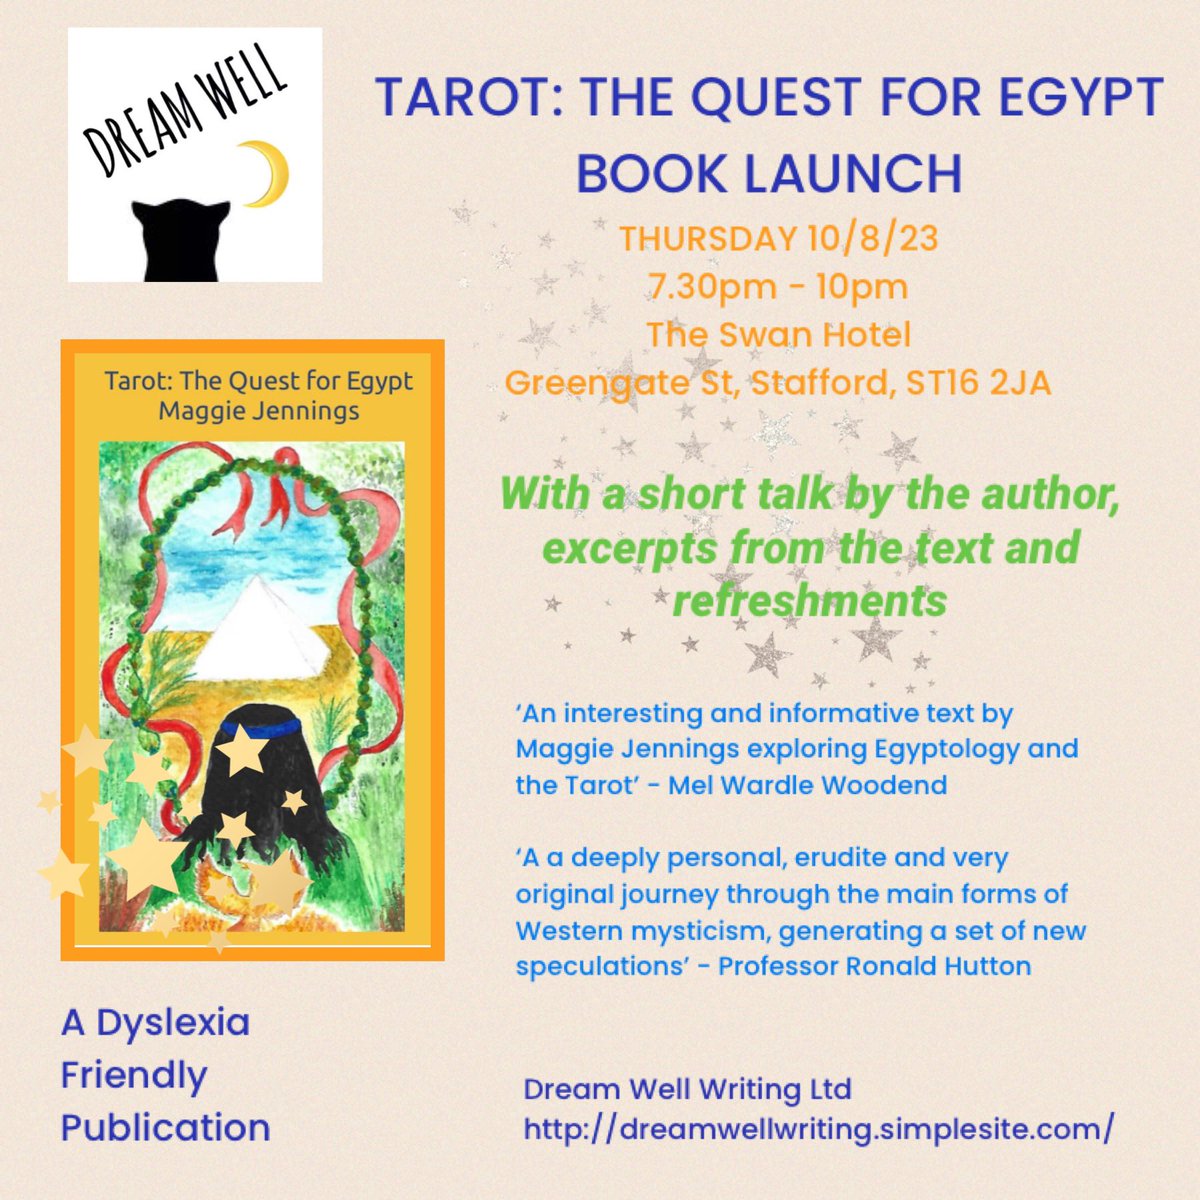 Tarot: The Quest for Egypt by Maggie Jennings
Book Launch

Thur 10/8/23 7.30-10pm The Swan Hotel, Greengate St, Stafford, ST16 2JA

With a short talk by the author, excerpts from the text and refreshments

A dyslexia friendly publication

#dreamwellwritingltd
#dyslexiafriendly